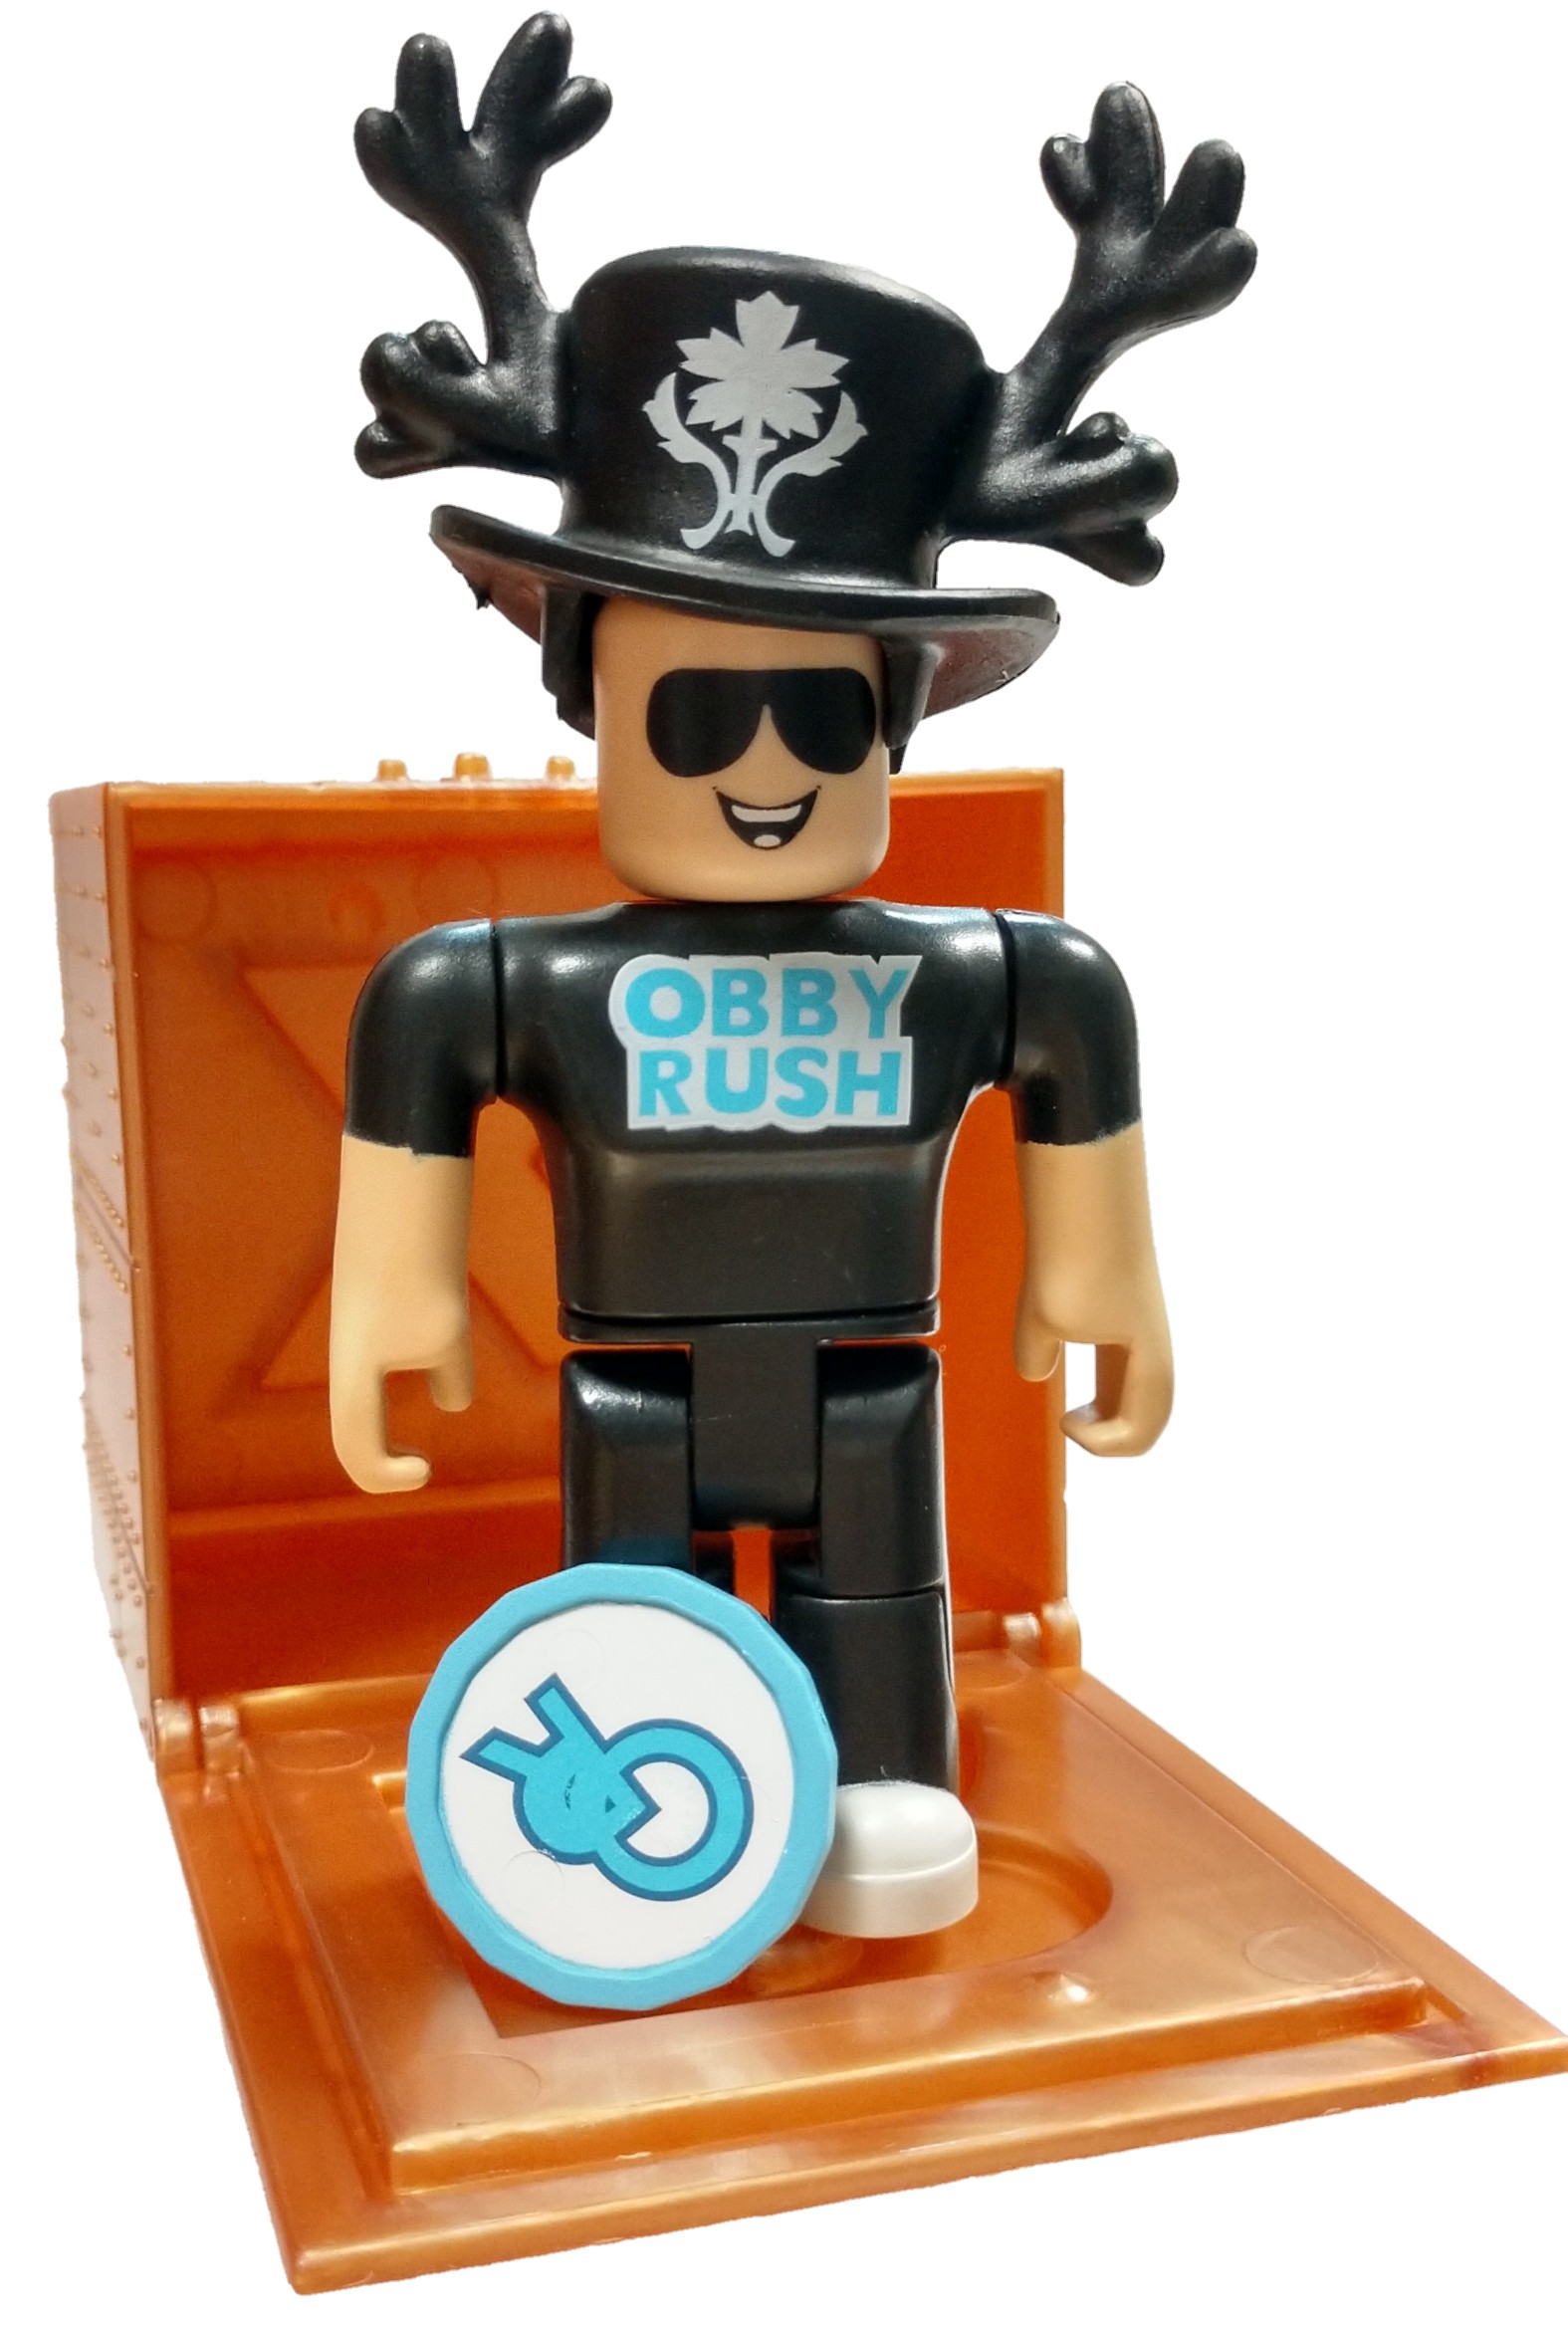 Roblox Series 8 Obby Rusher 3 Inch Mini Figure With Cube And Online Code Loose 609411477991 Ebay - obby rush roblox codes